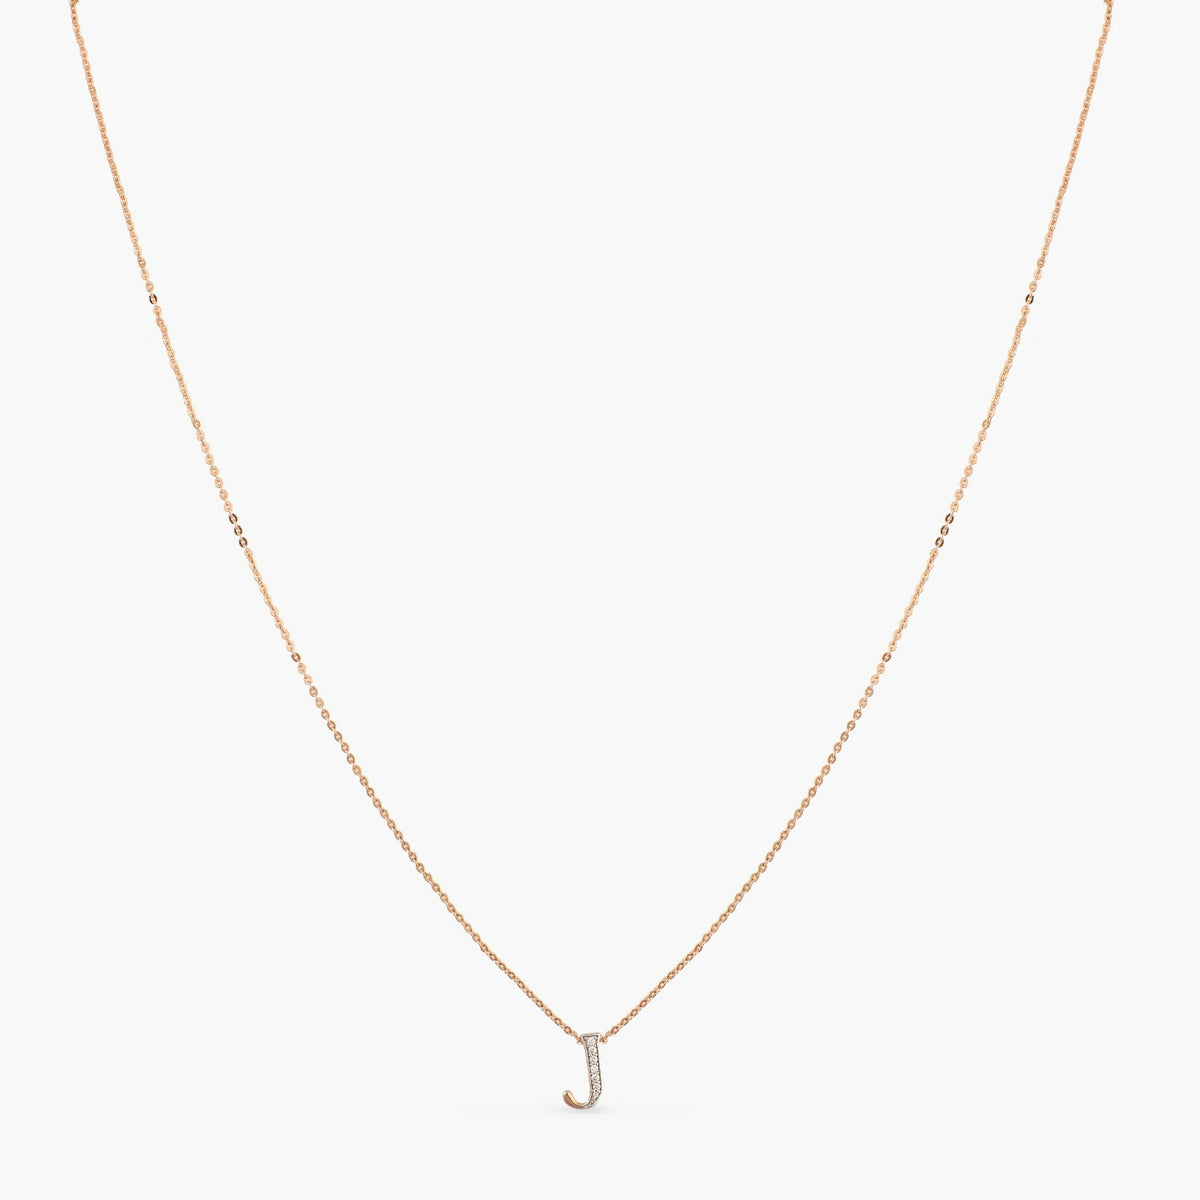 14K GOLD M INITIAL NECKLACE